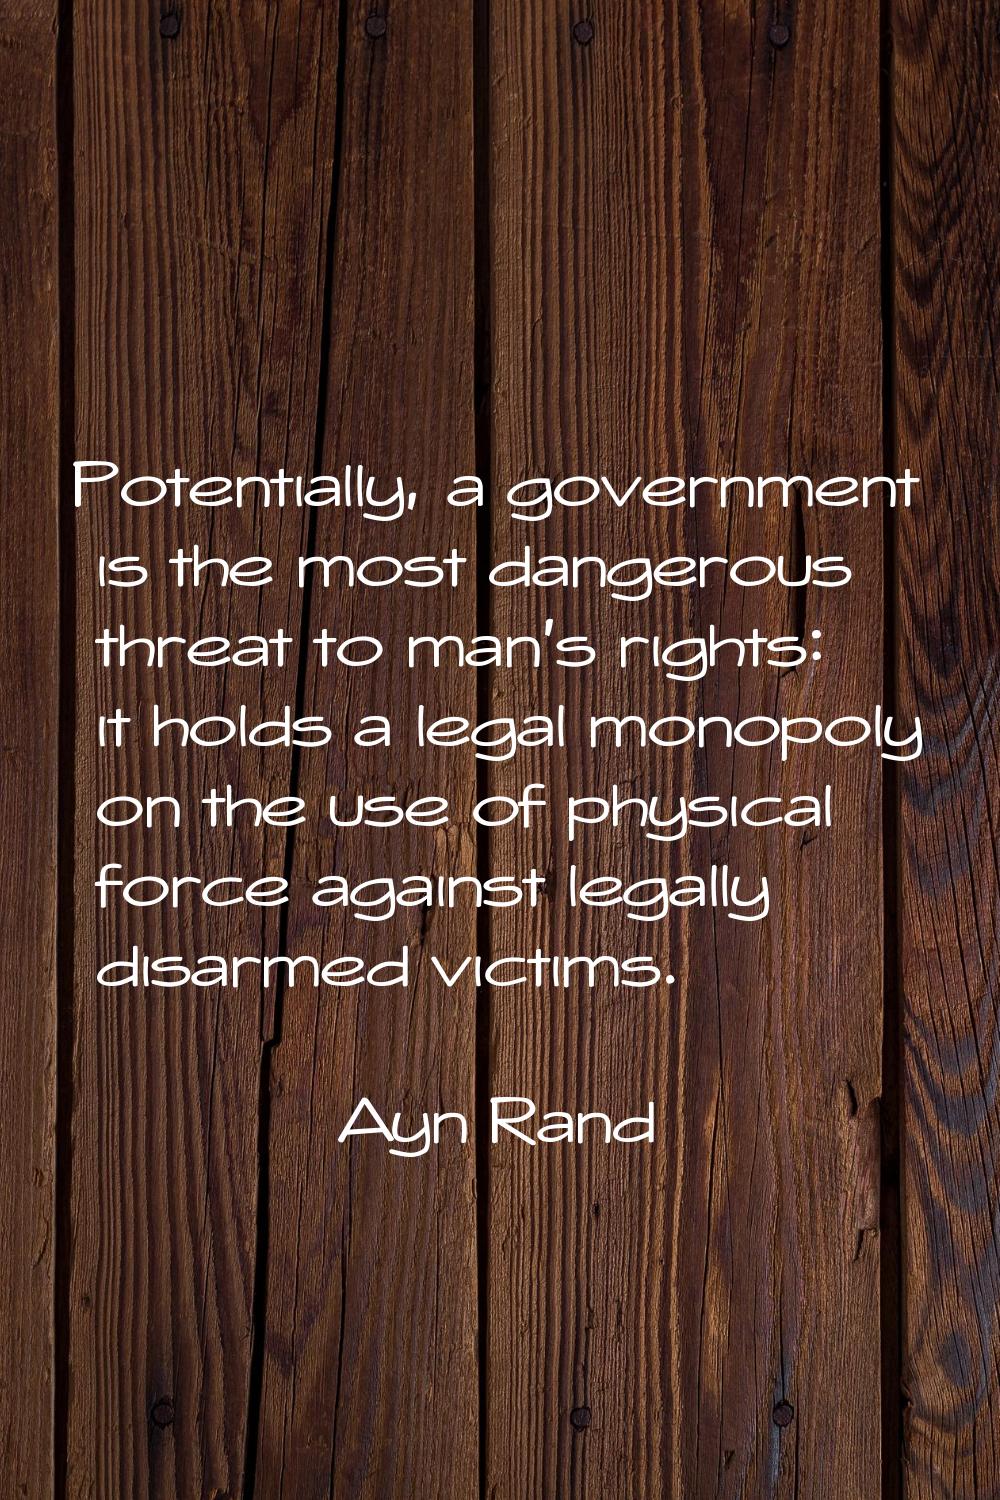 Potentially, a government is the most dangerous threat to man's rights: it holds a legal monopoly o